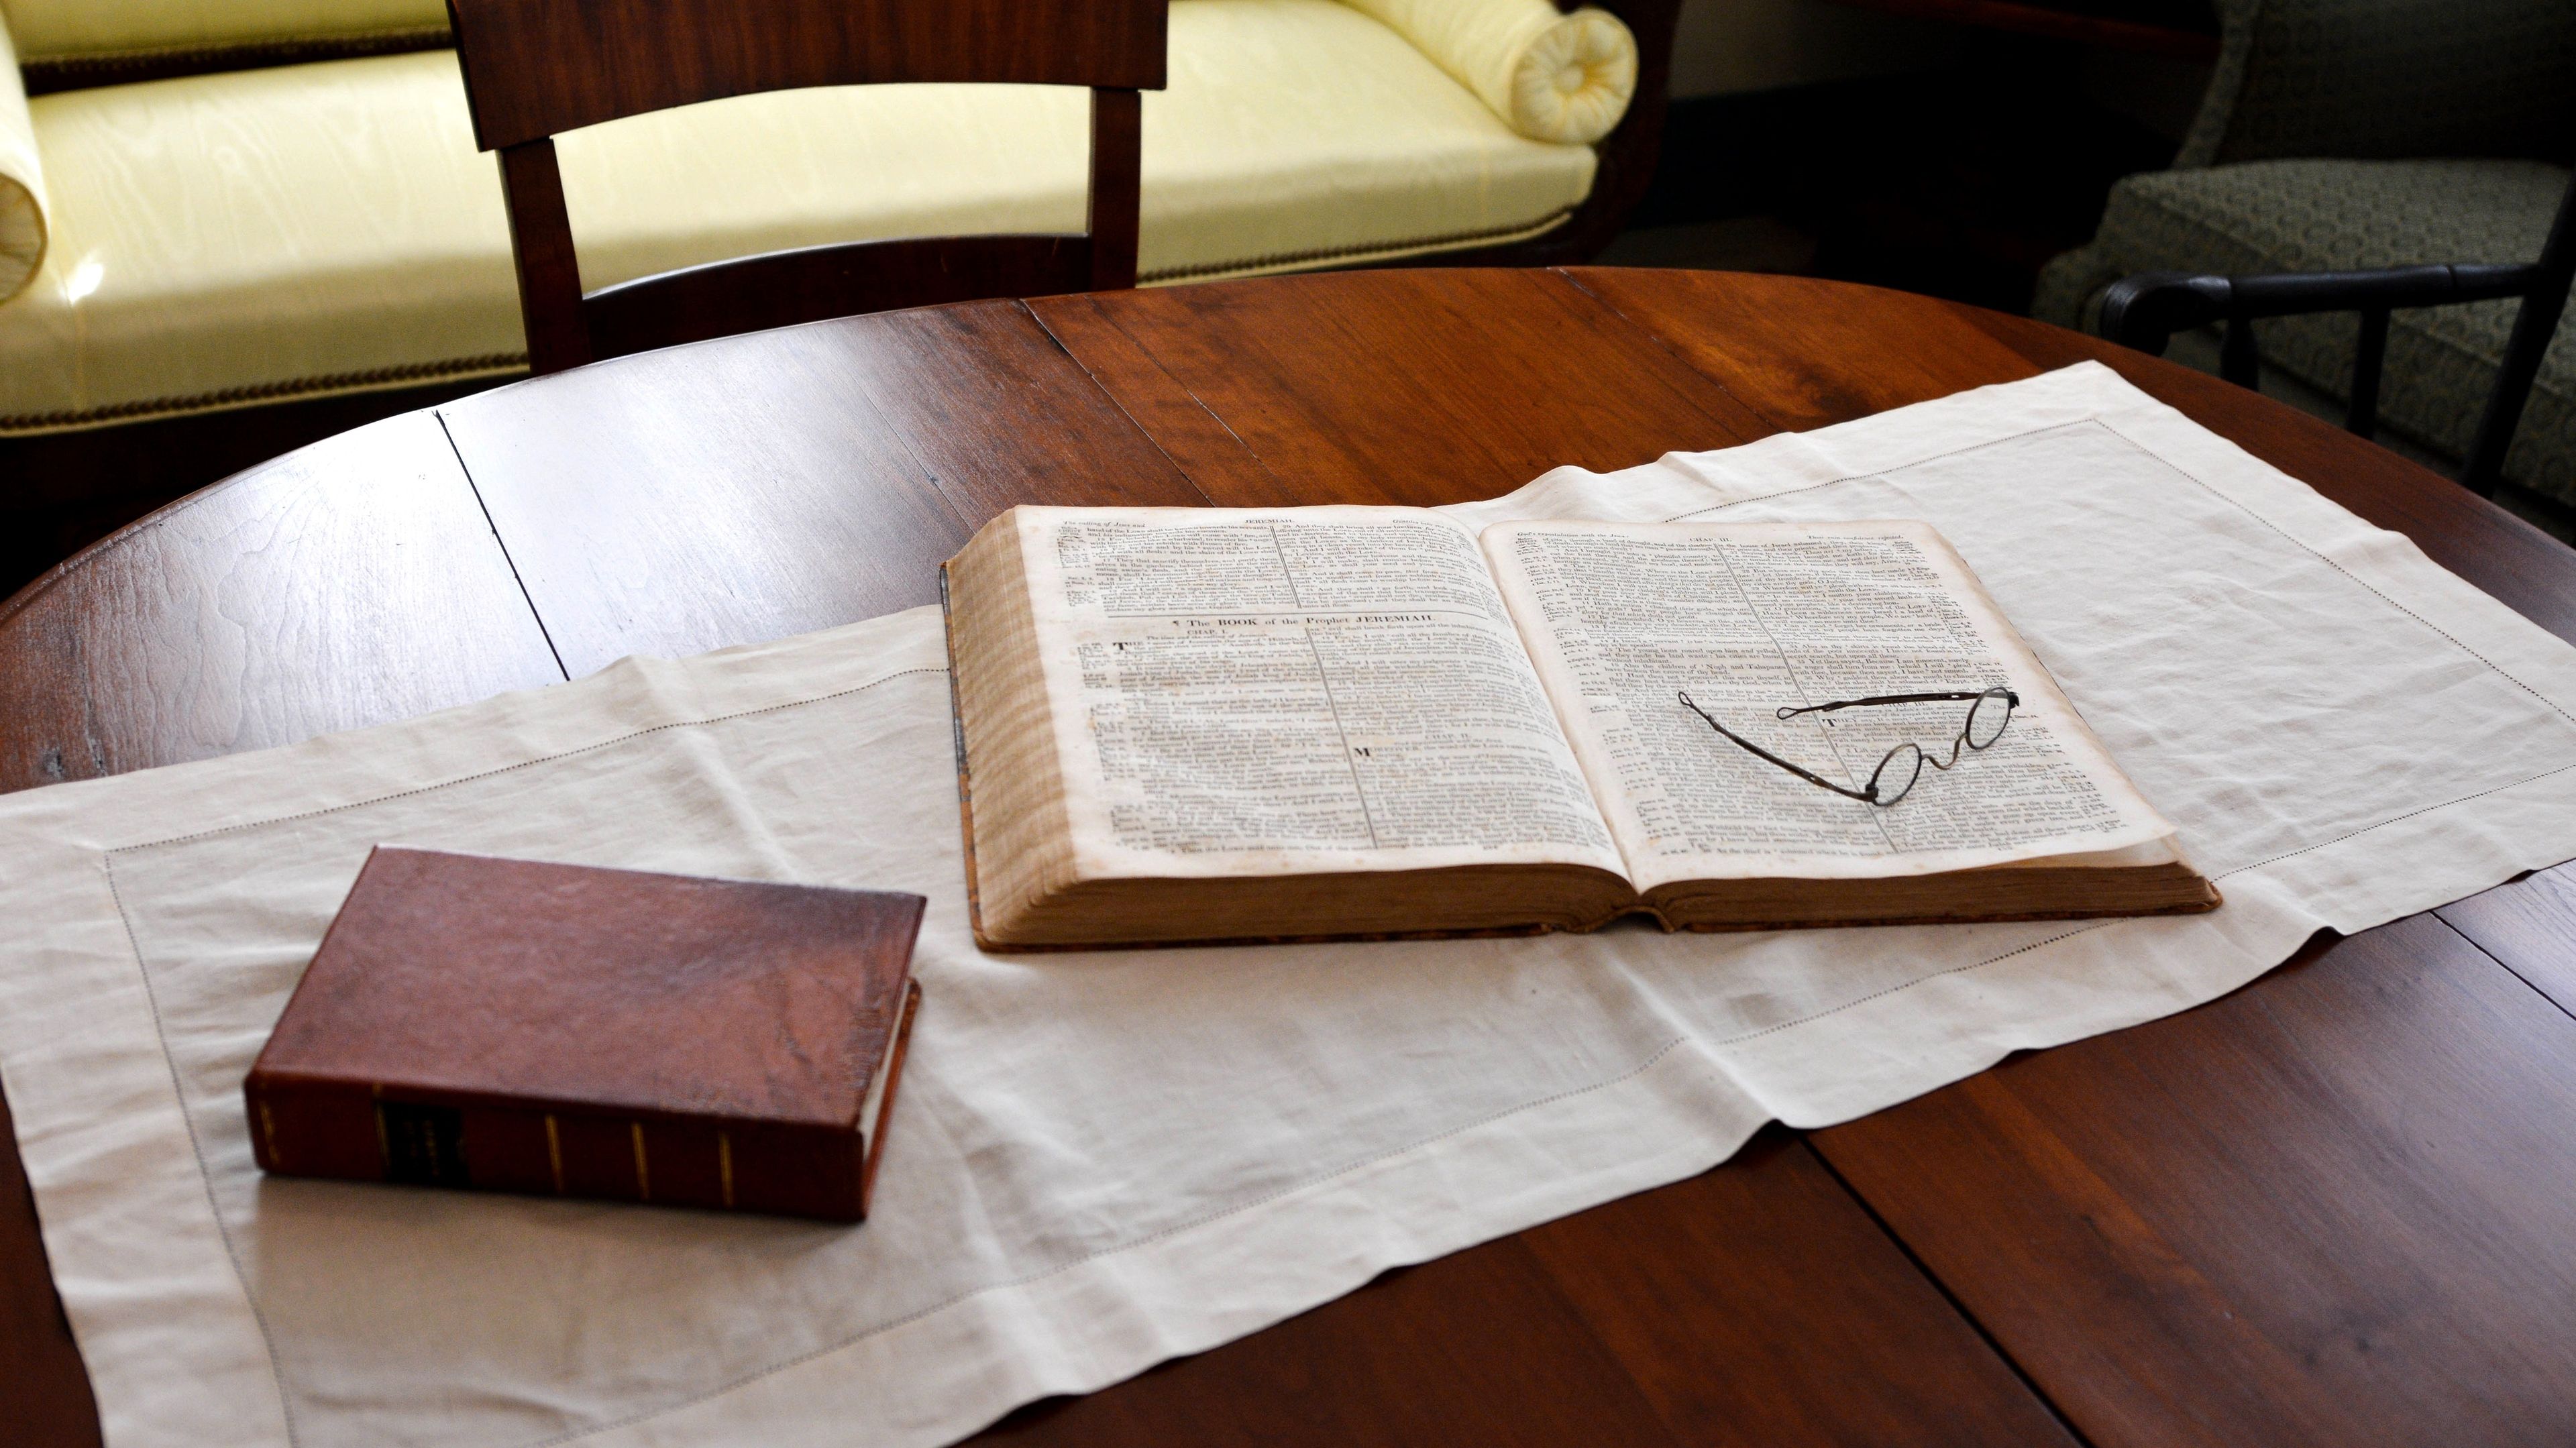 A pair of scriptures open on a table at the John Johnson farm in Hiram, Ohio.